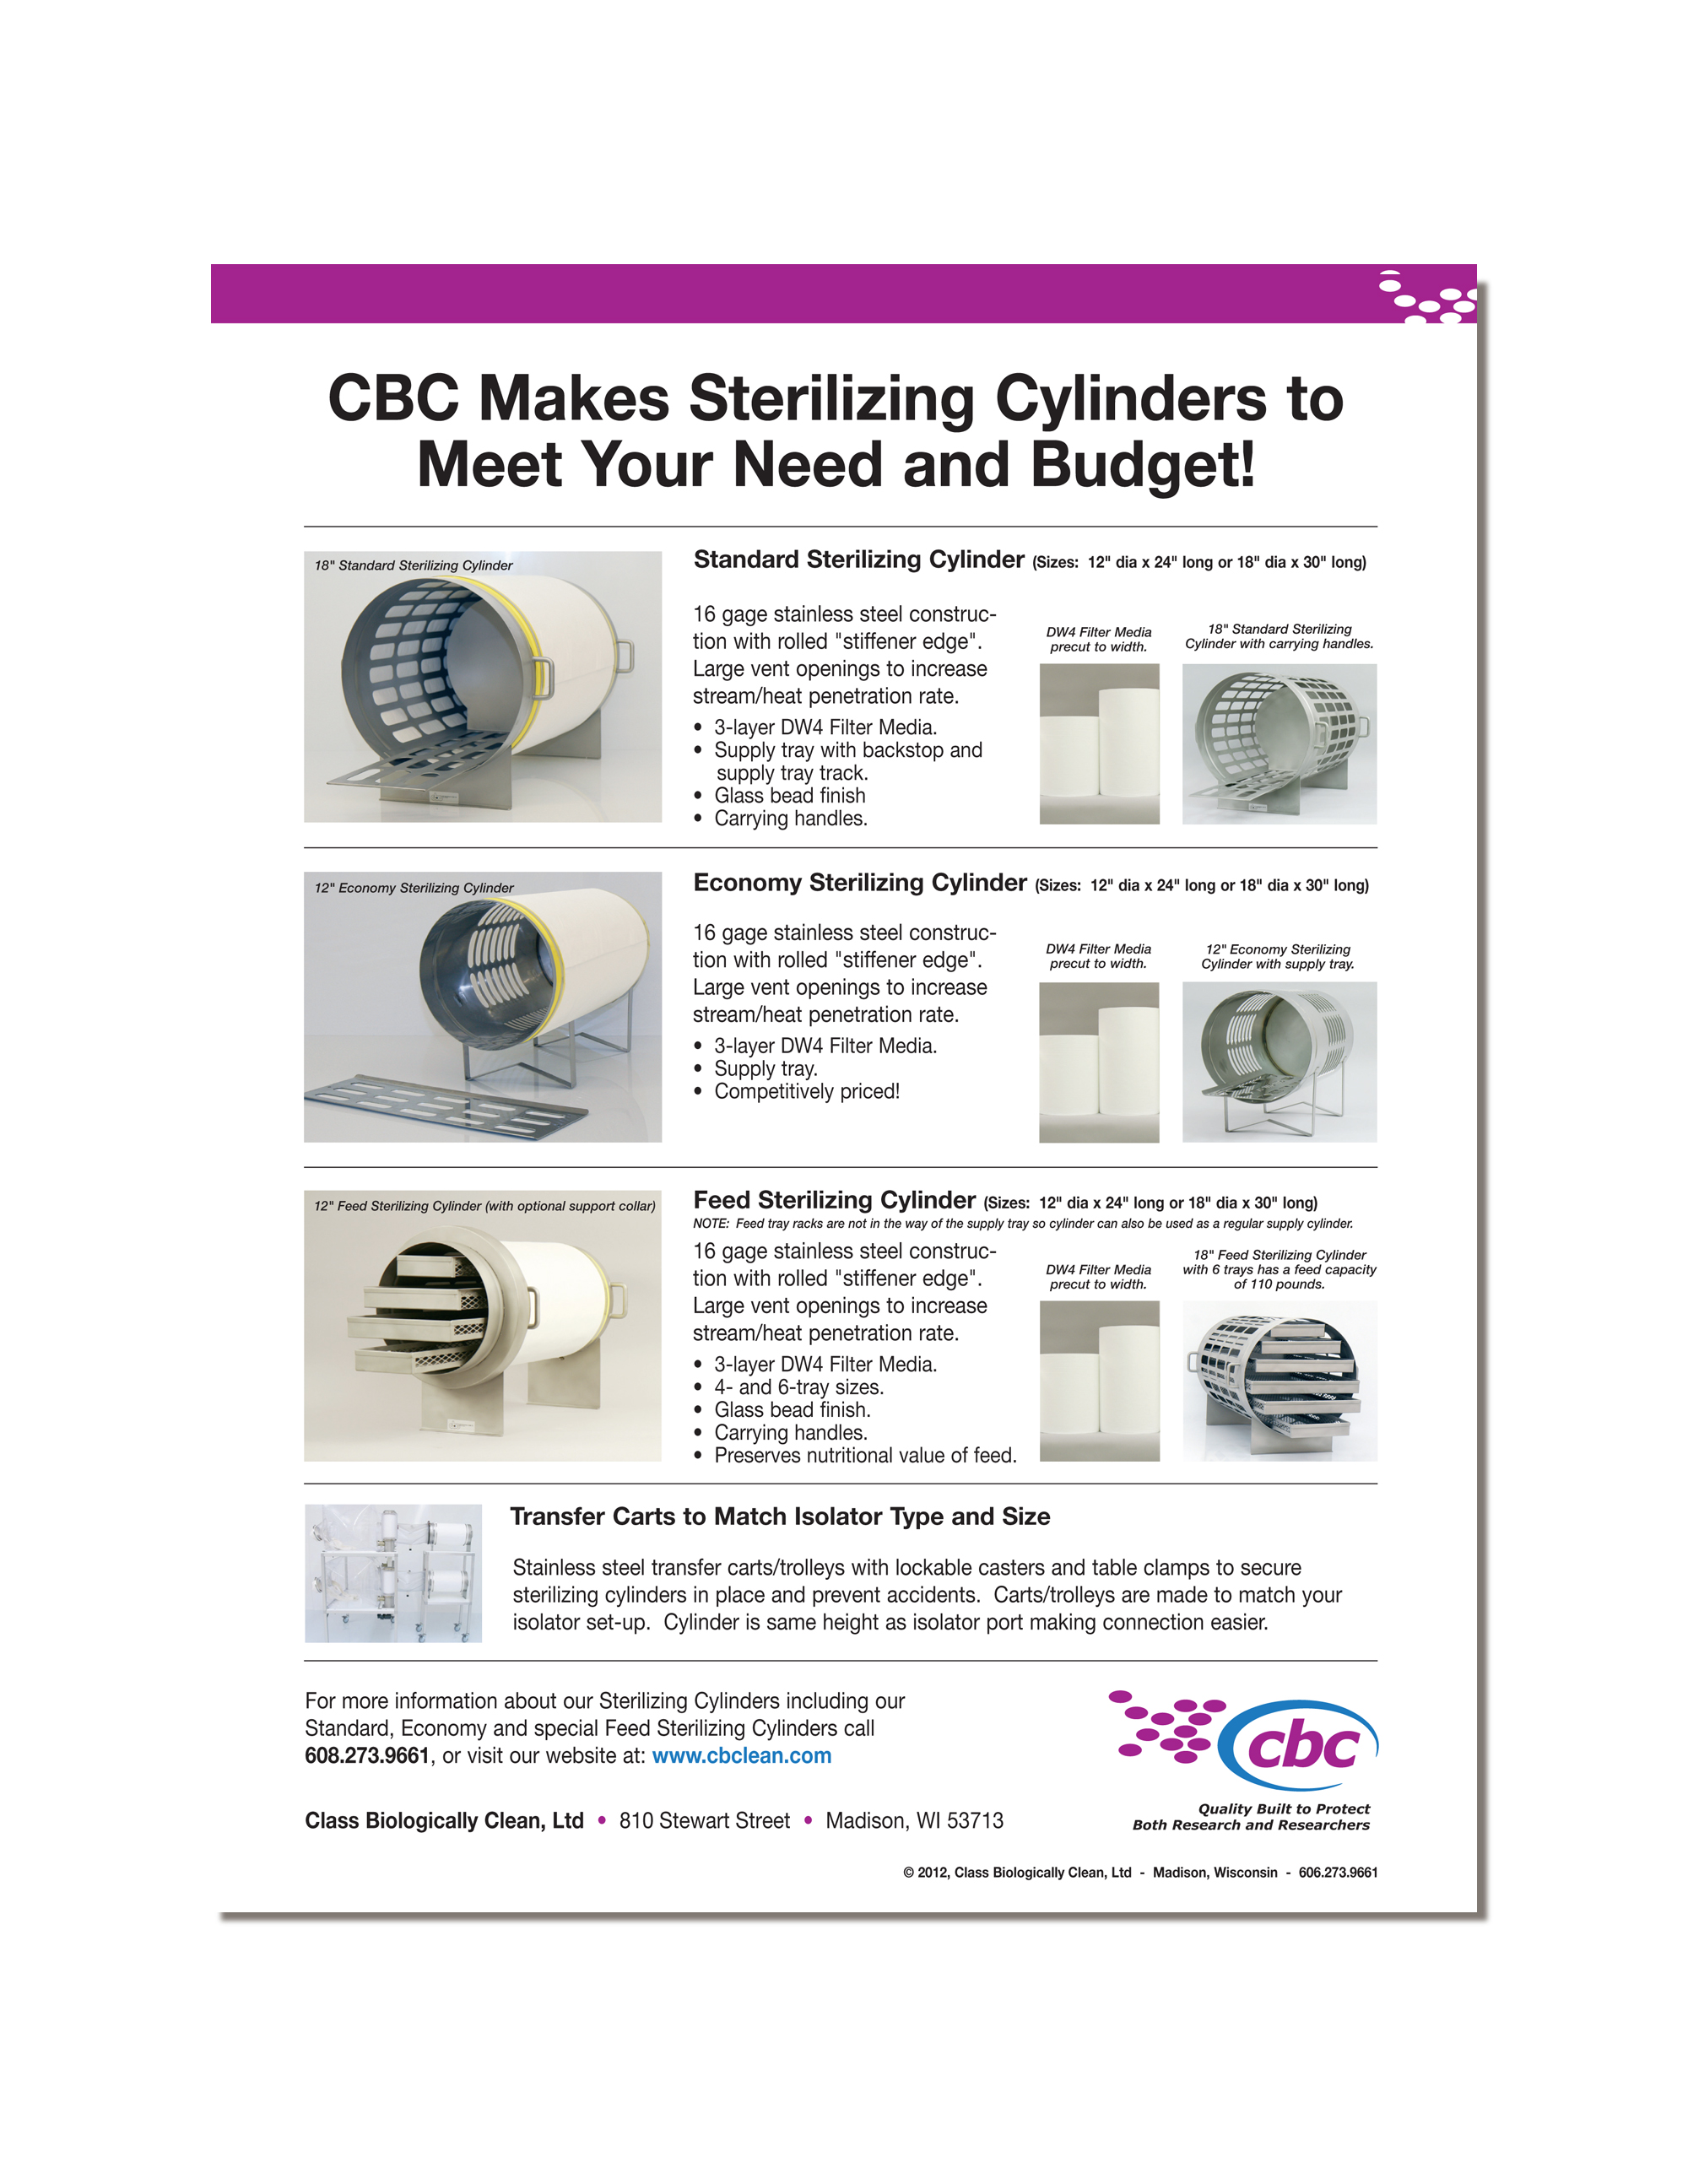 Download a printable flyer about CBC's Economy Autoclave Sterilizing Cylinders for sterilizing water, bedding, cages, etc... for gnotobiotic animal research. Click here to download flyer.